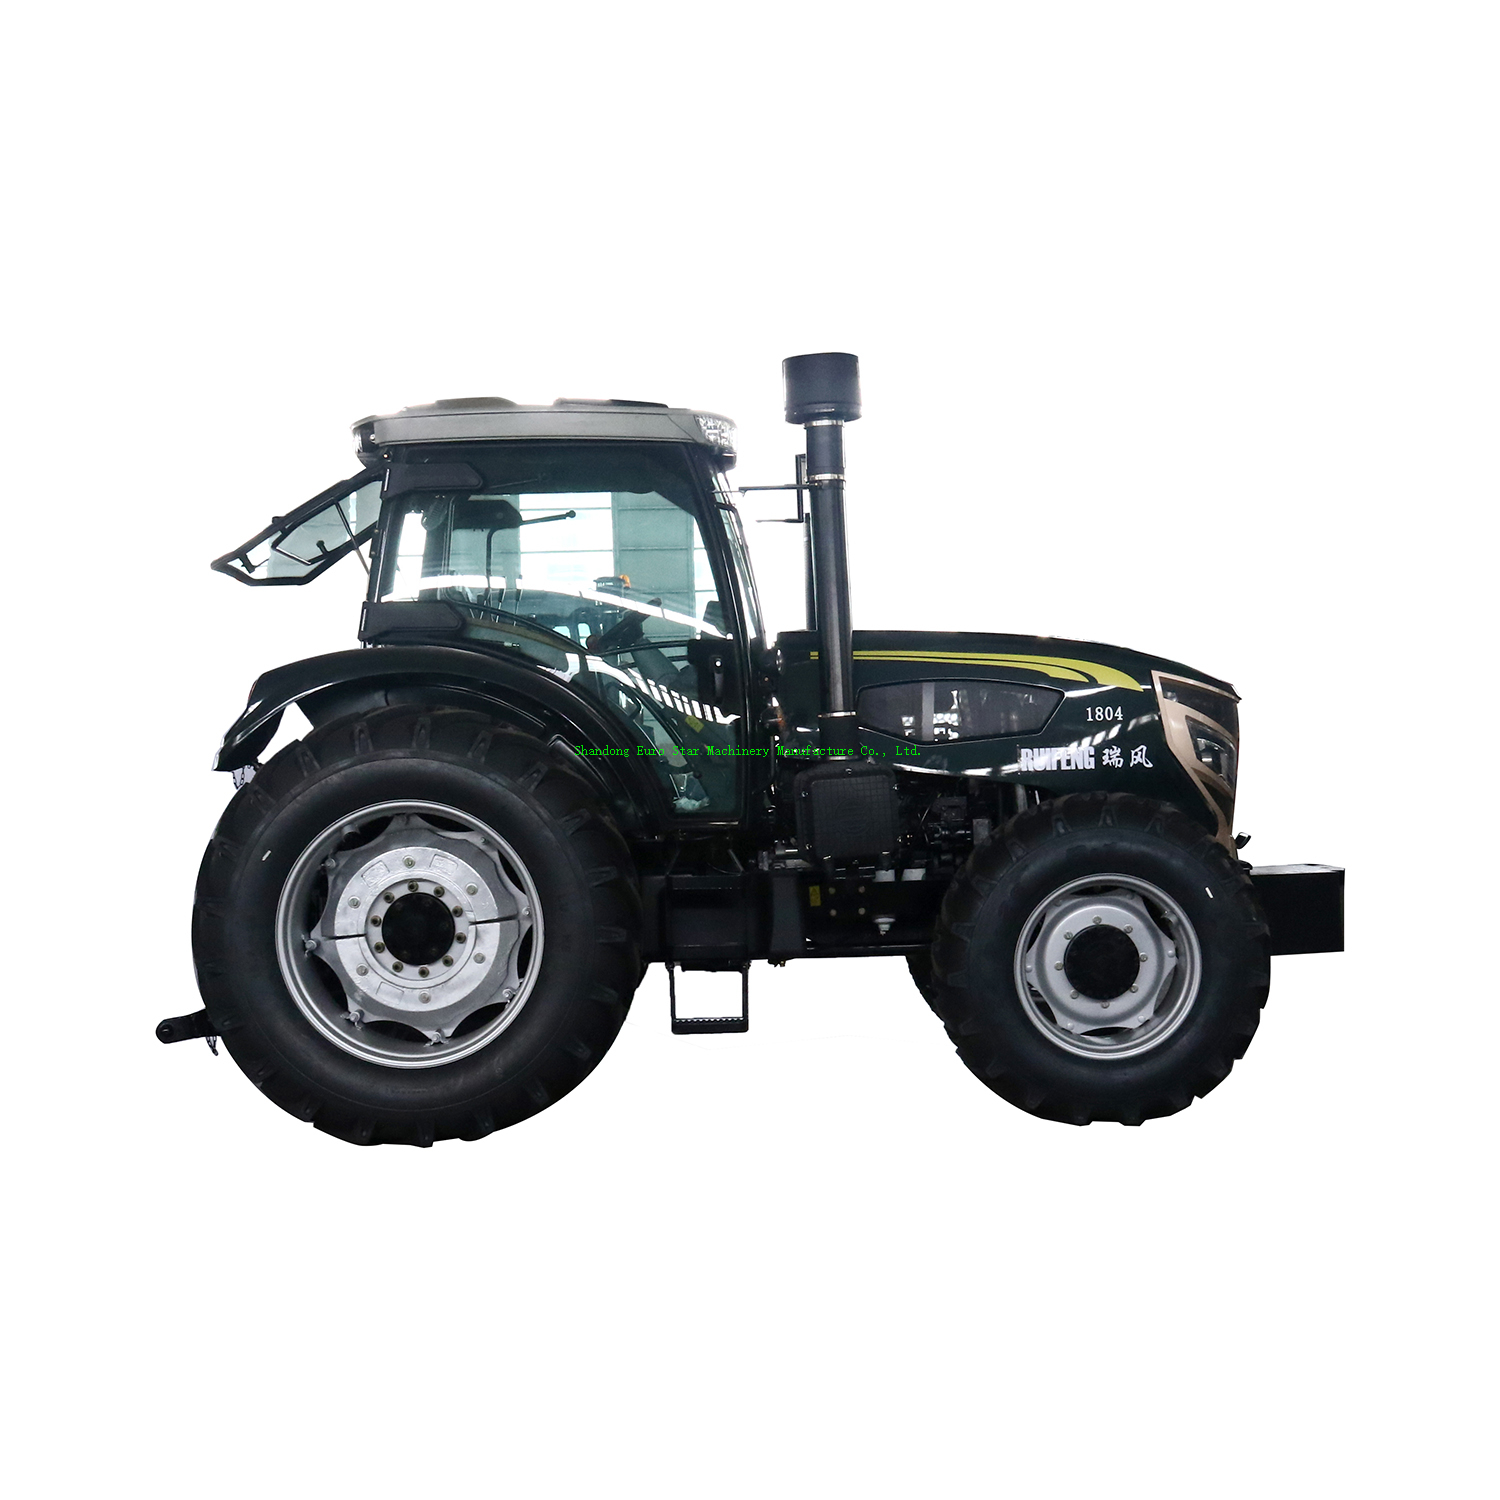 TF 100-165HP Tractor 125HP 2WD Mini Small Four Wheel Farm Crawler Tractor Orchard Paddy Lawn Big Garden Walking Diesel China Agricultural Machinery Tractor